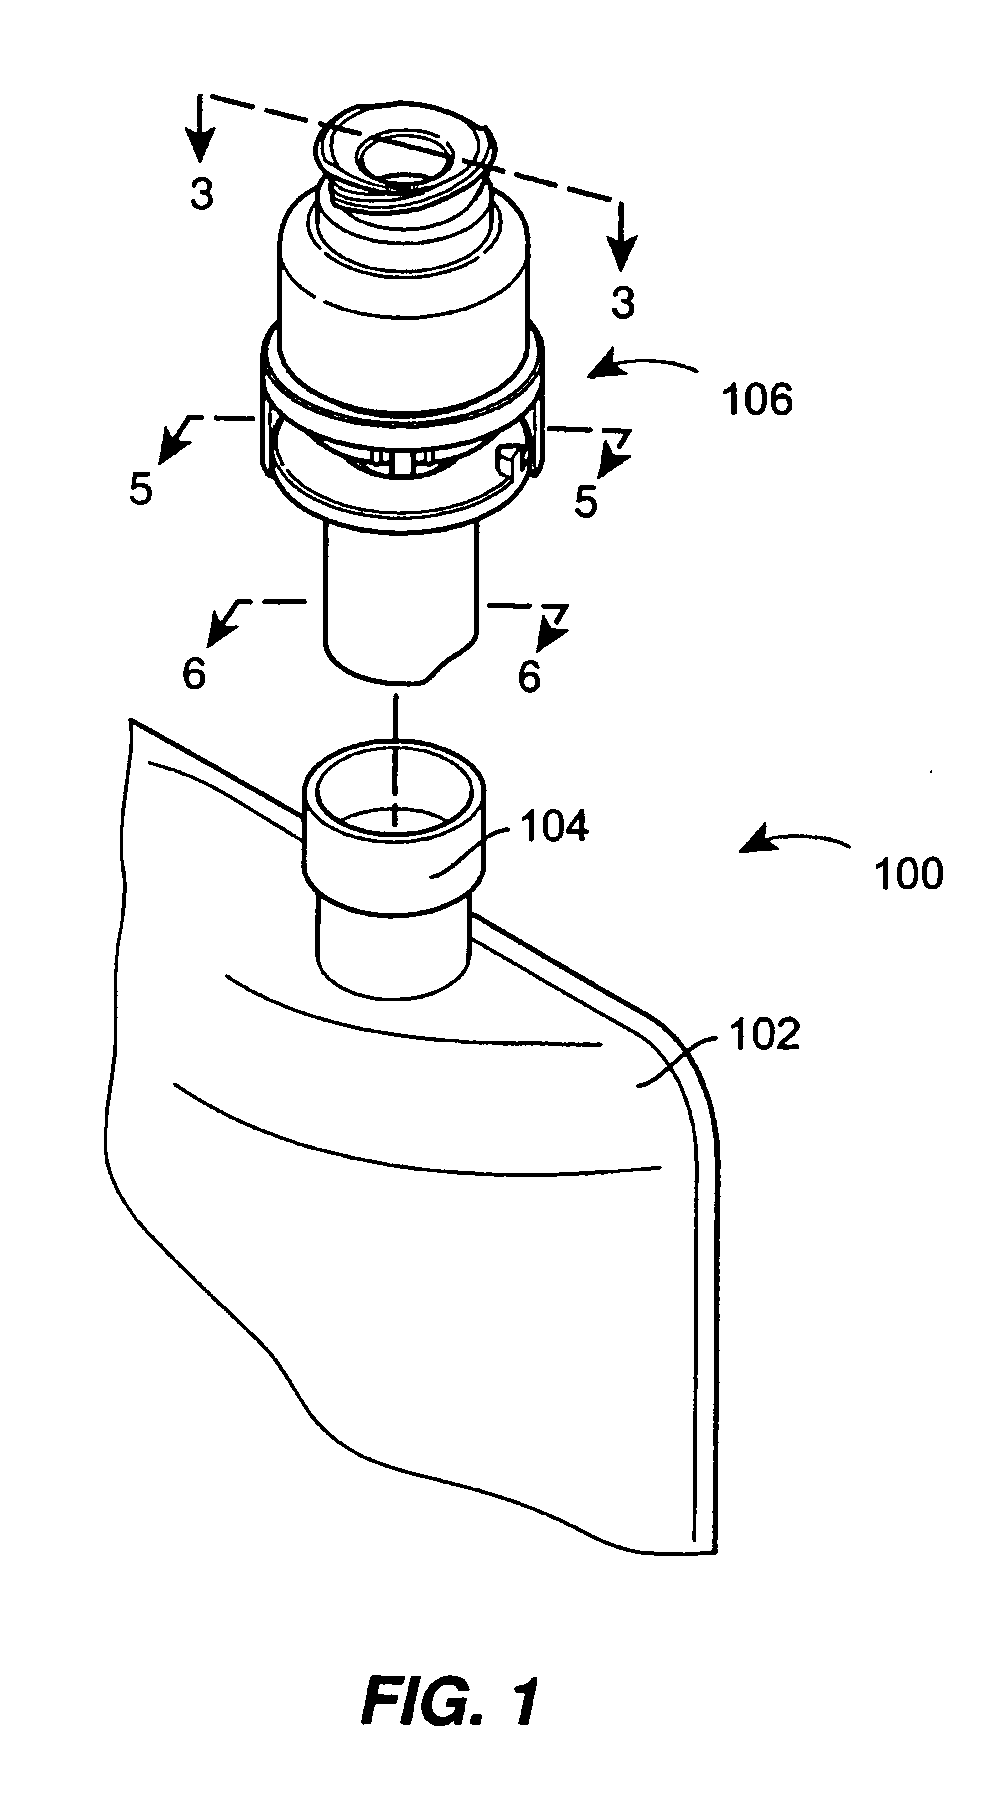 Port assembly for use with needleless connector